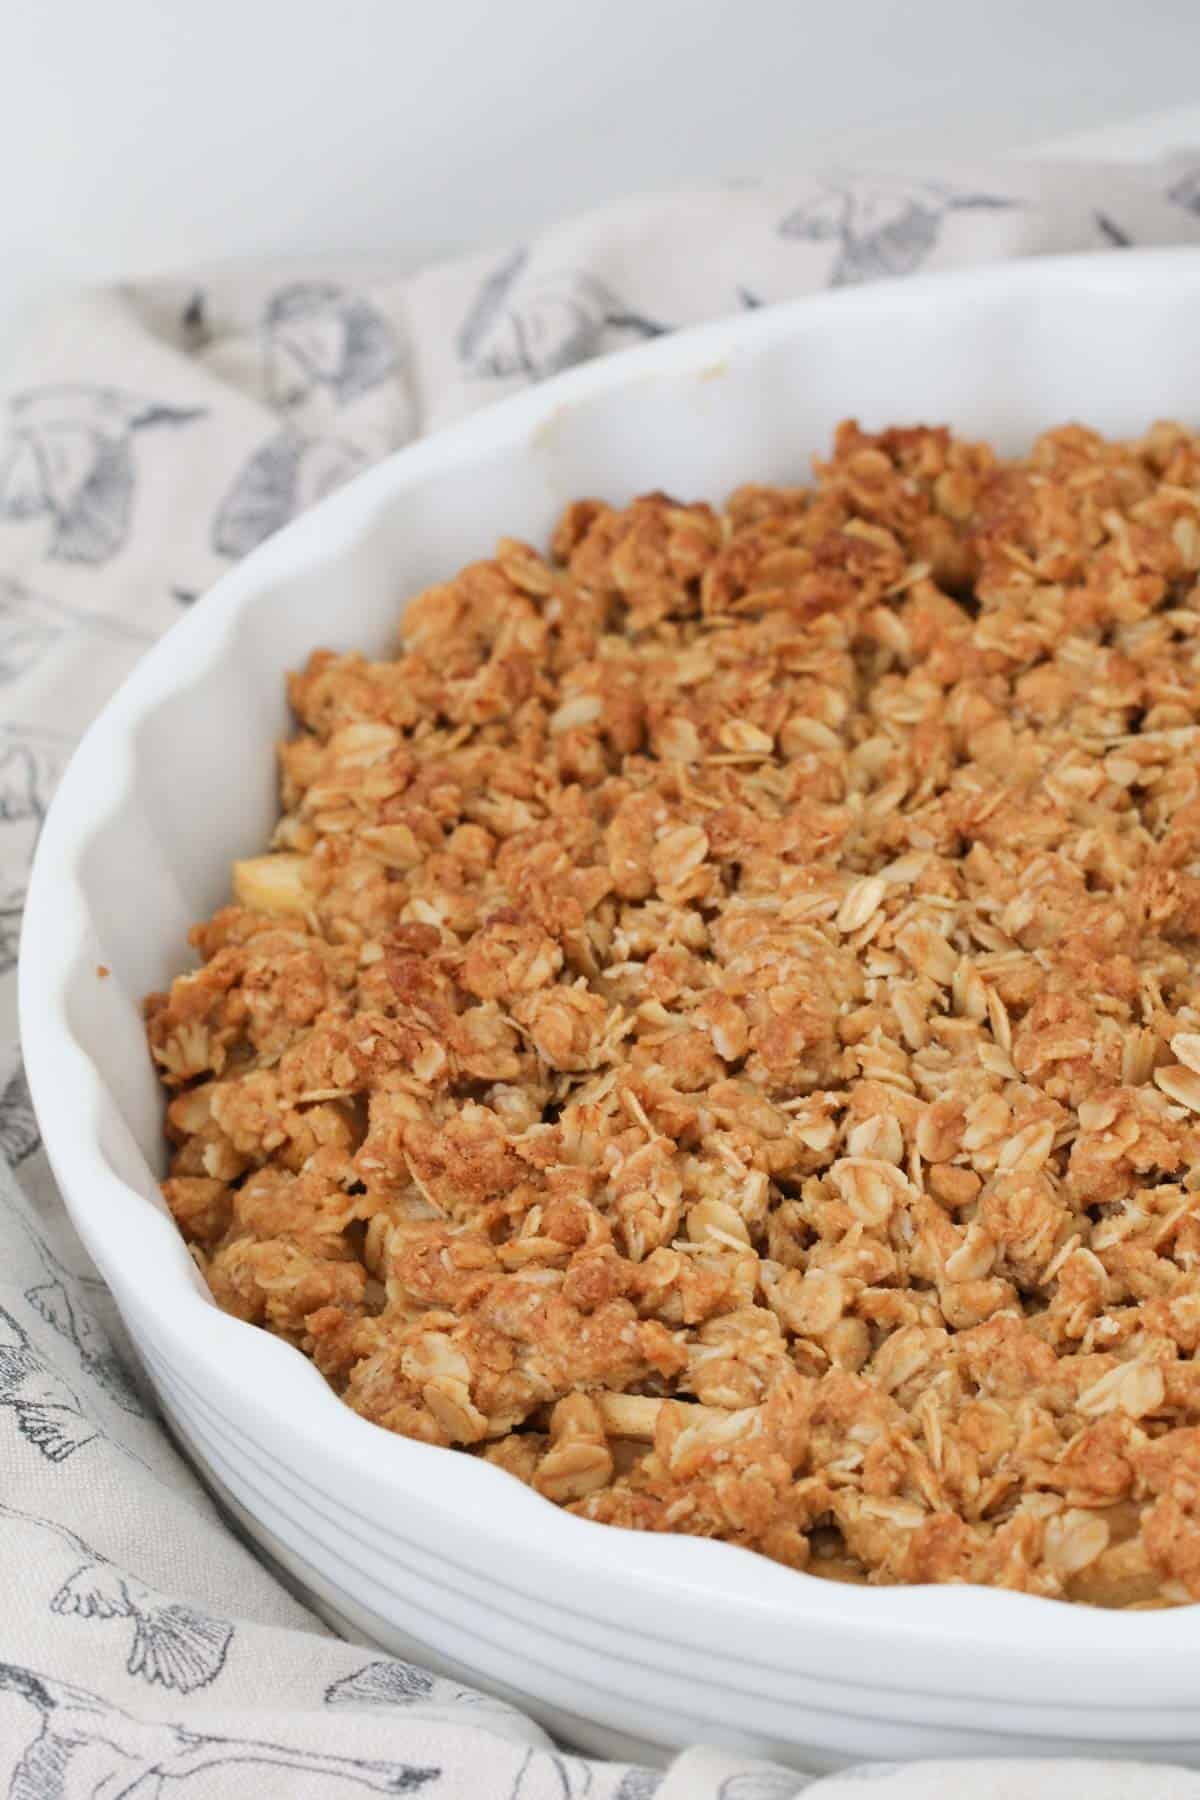 A round baking dish filled with a crunchy golden oat topping.